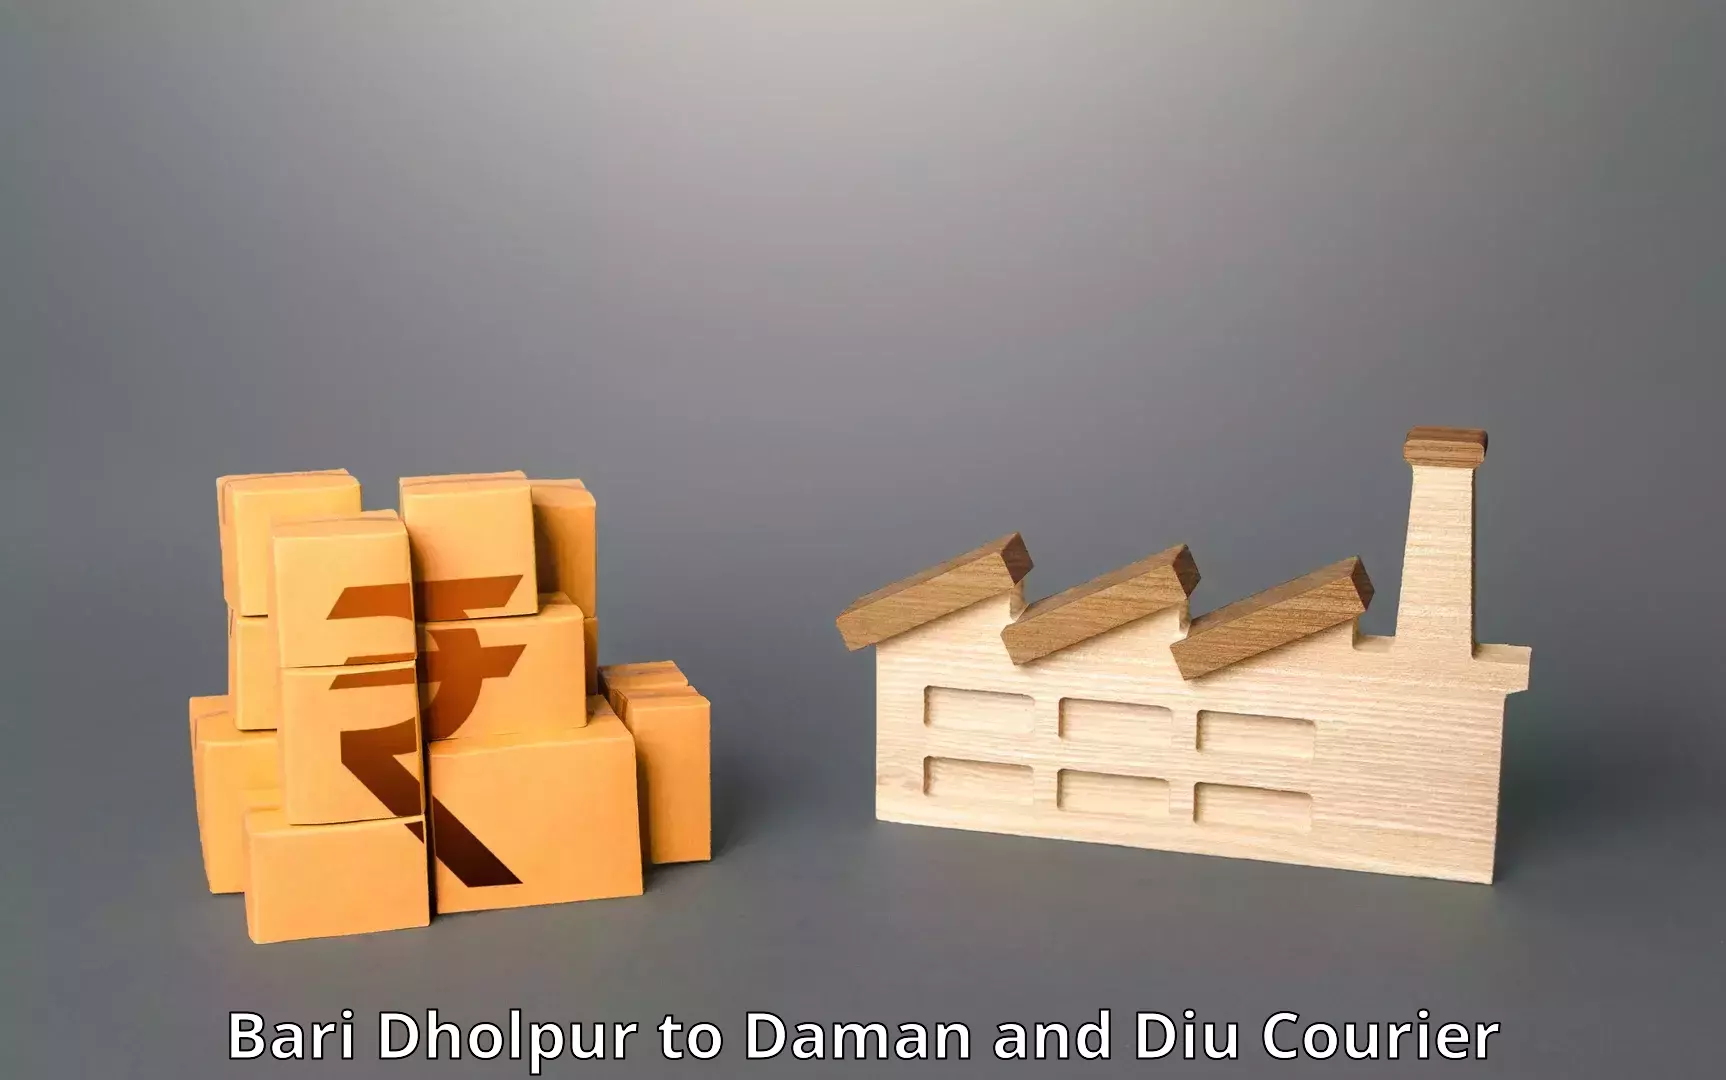 Track and trace shipping Bari Dholpur to Daman